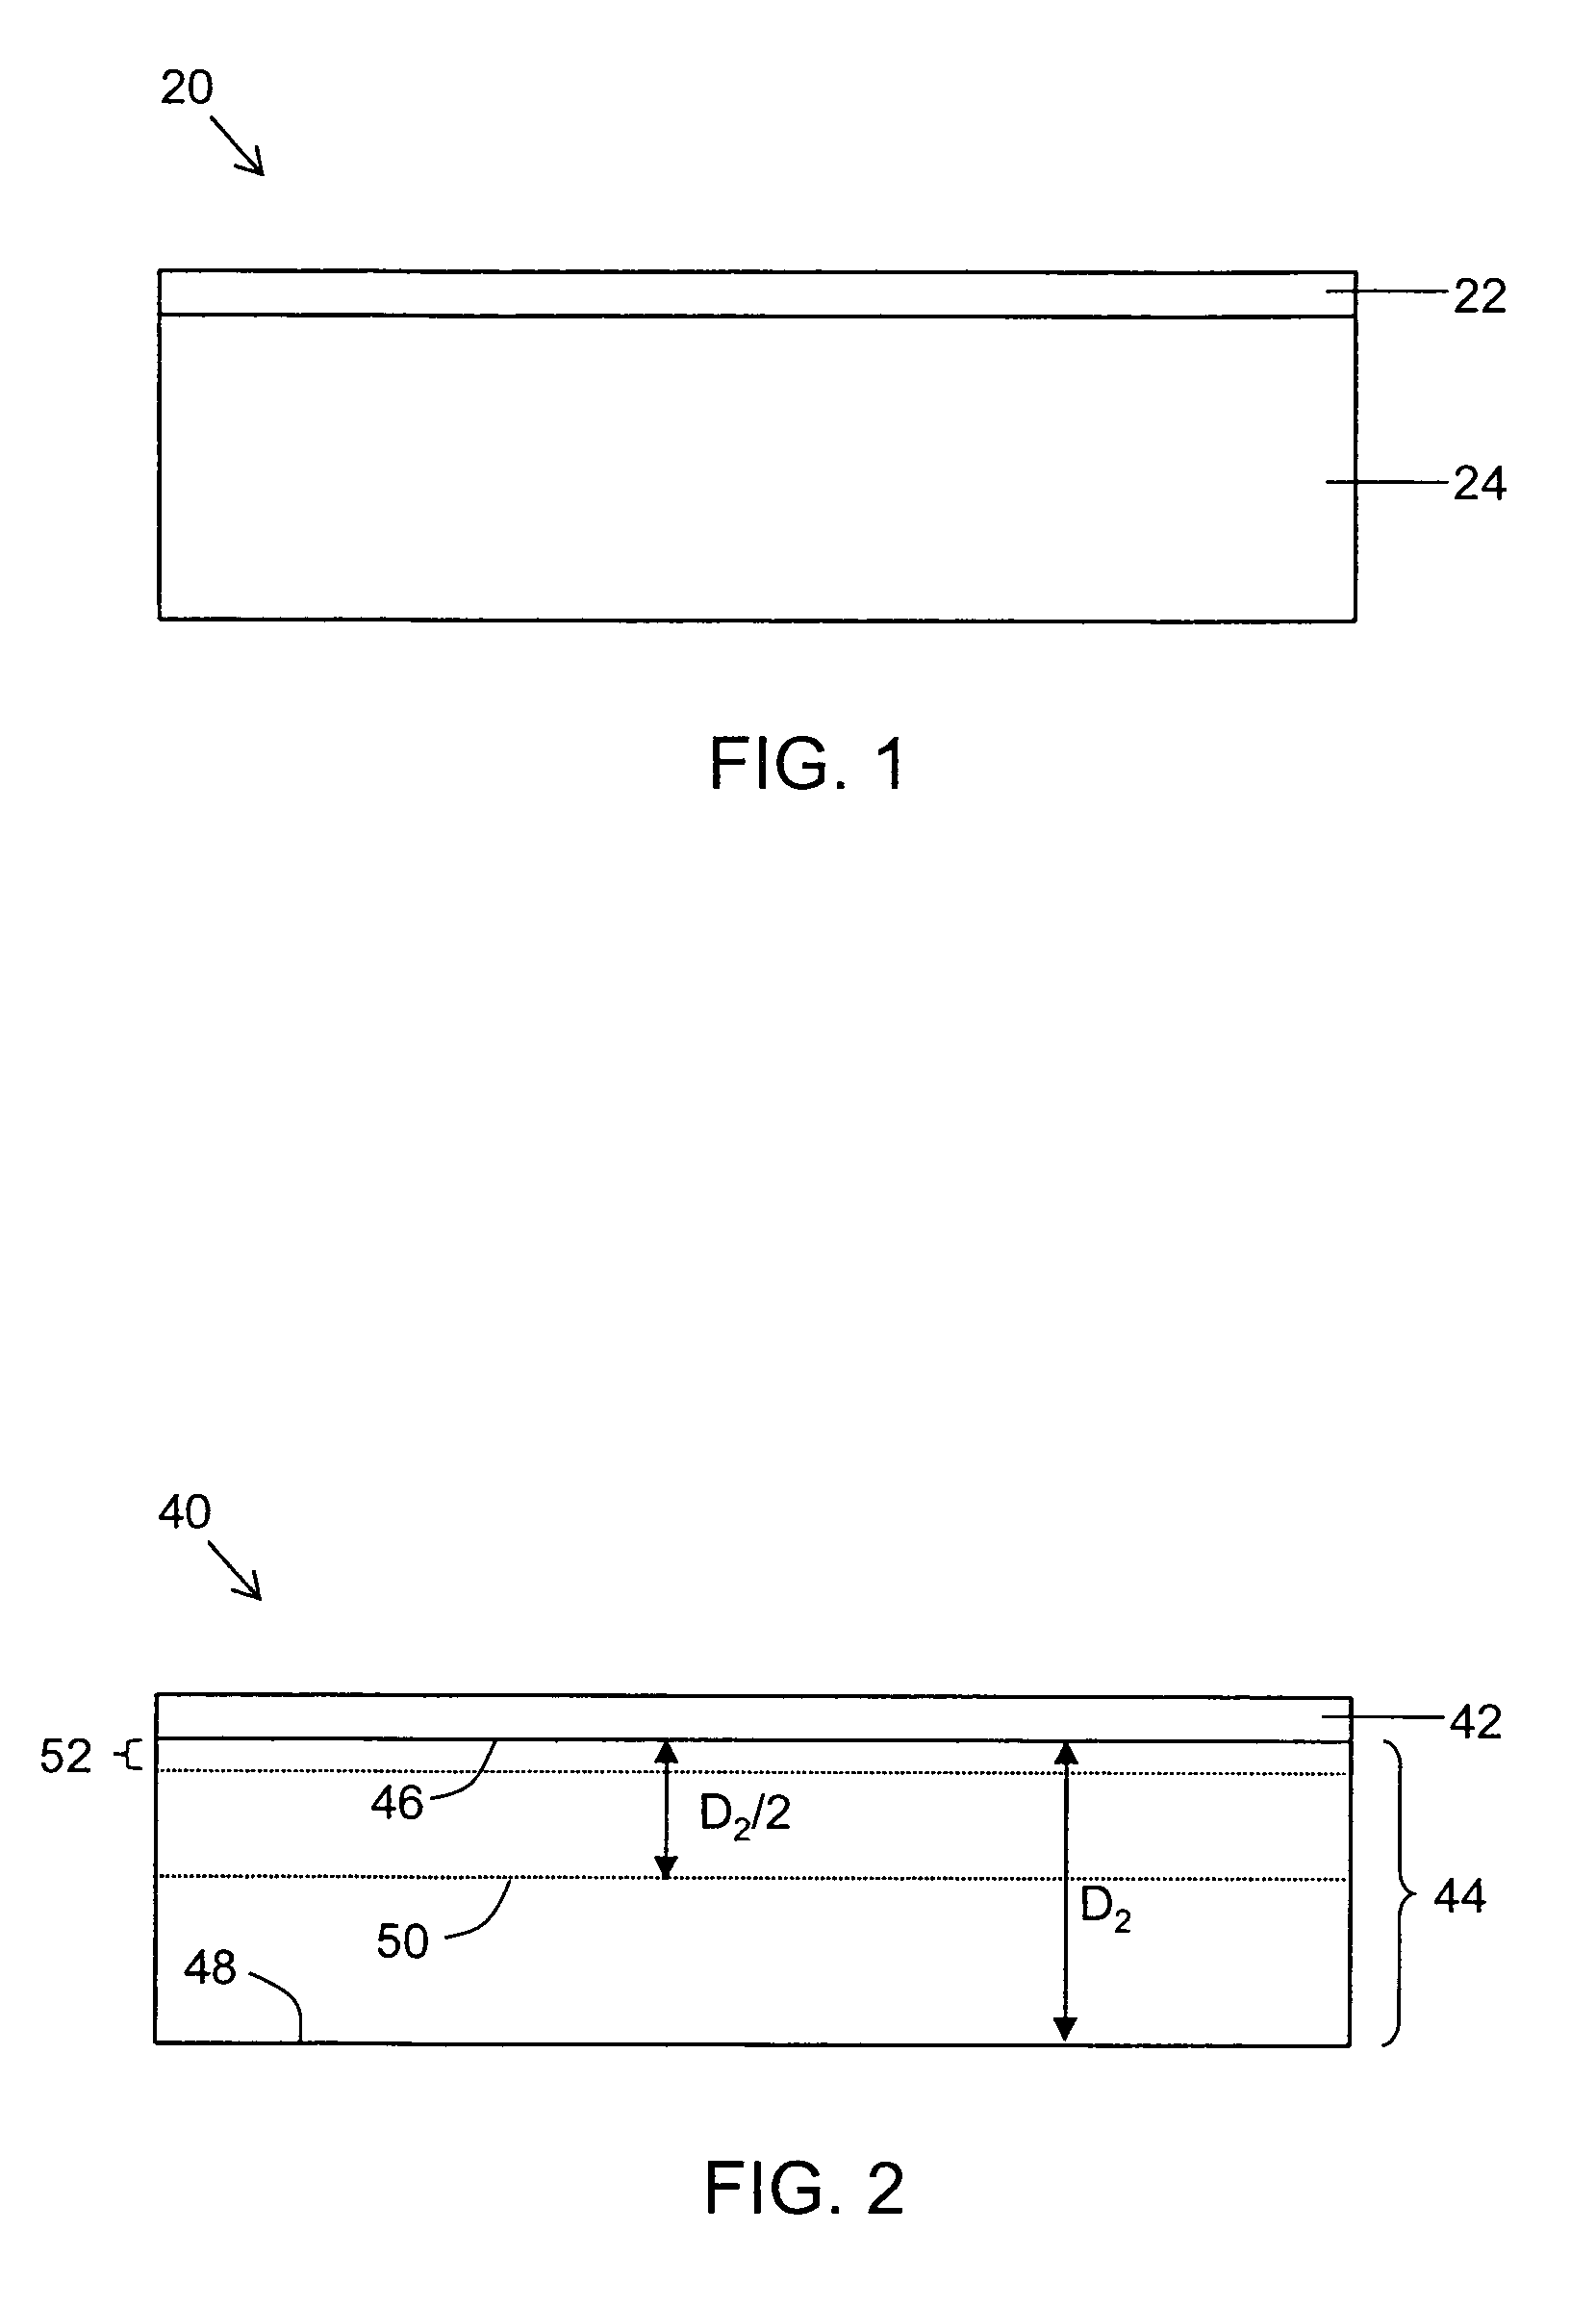 High strain glass/glass-ceramic containing semiconductor-on-insulator structures